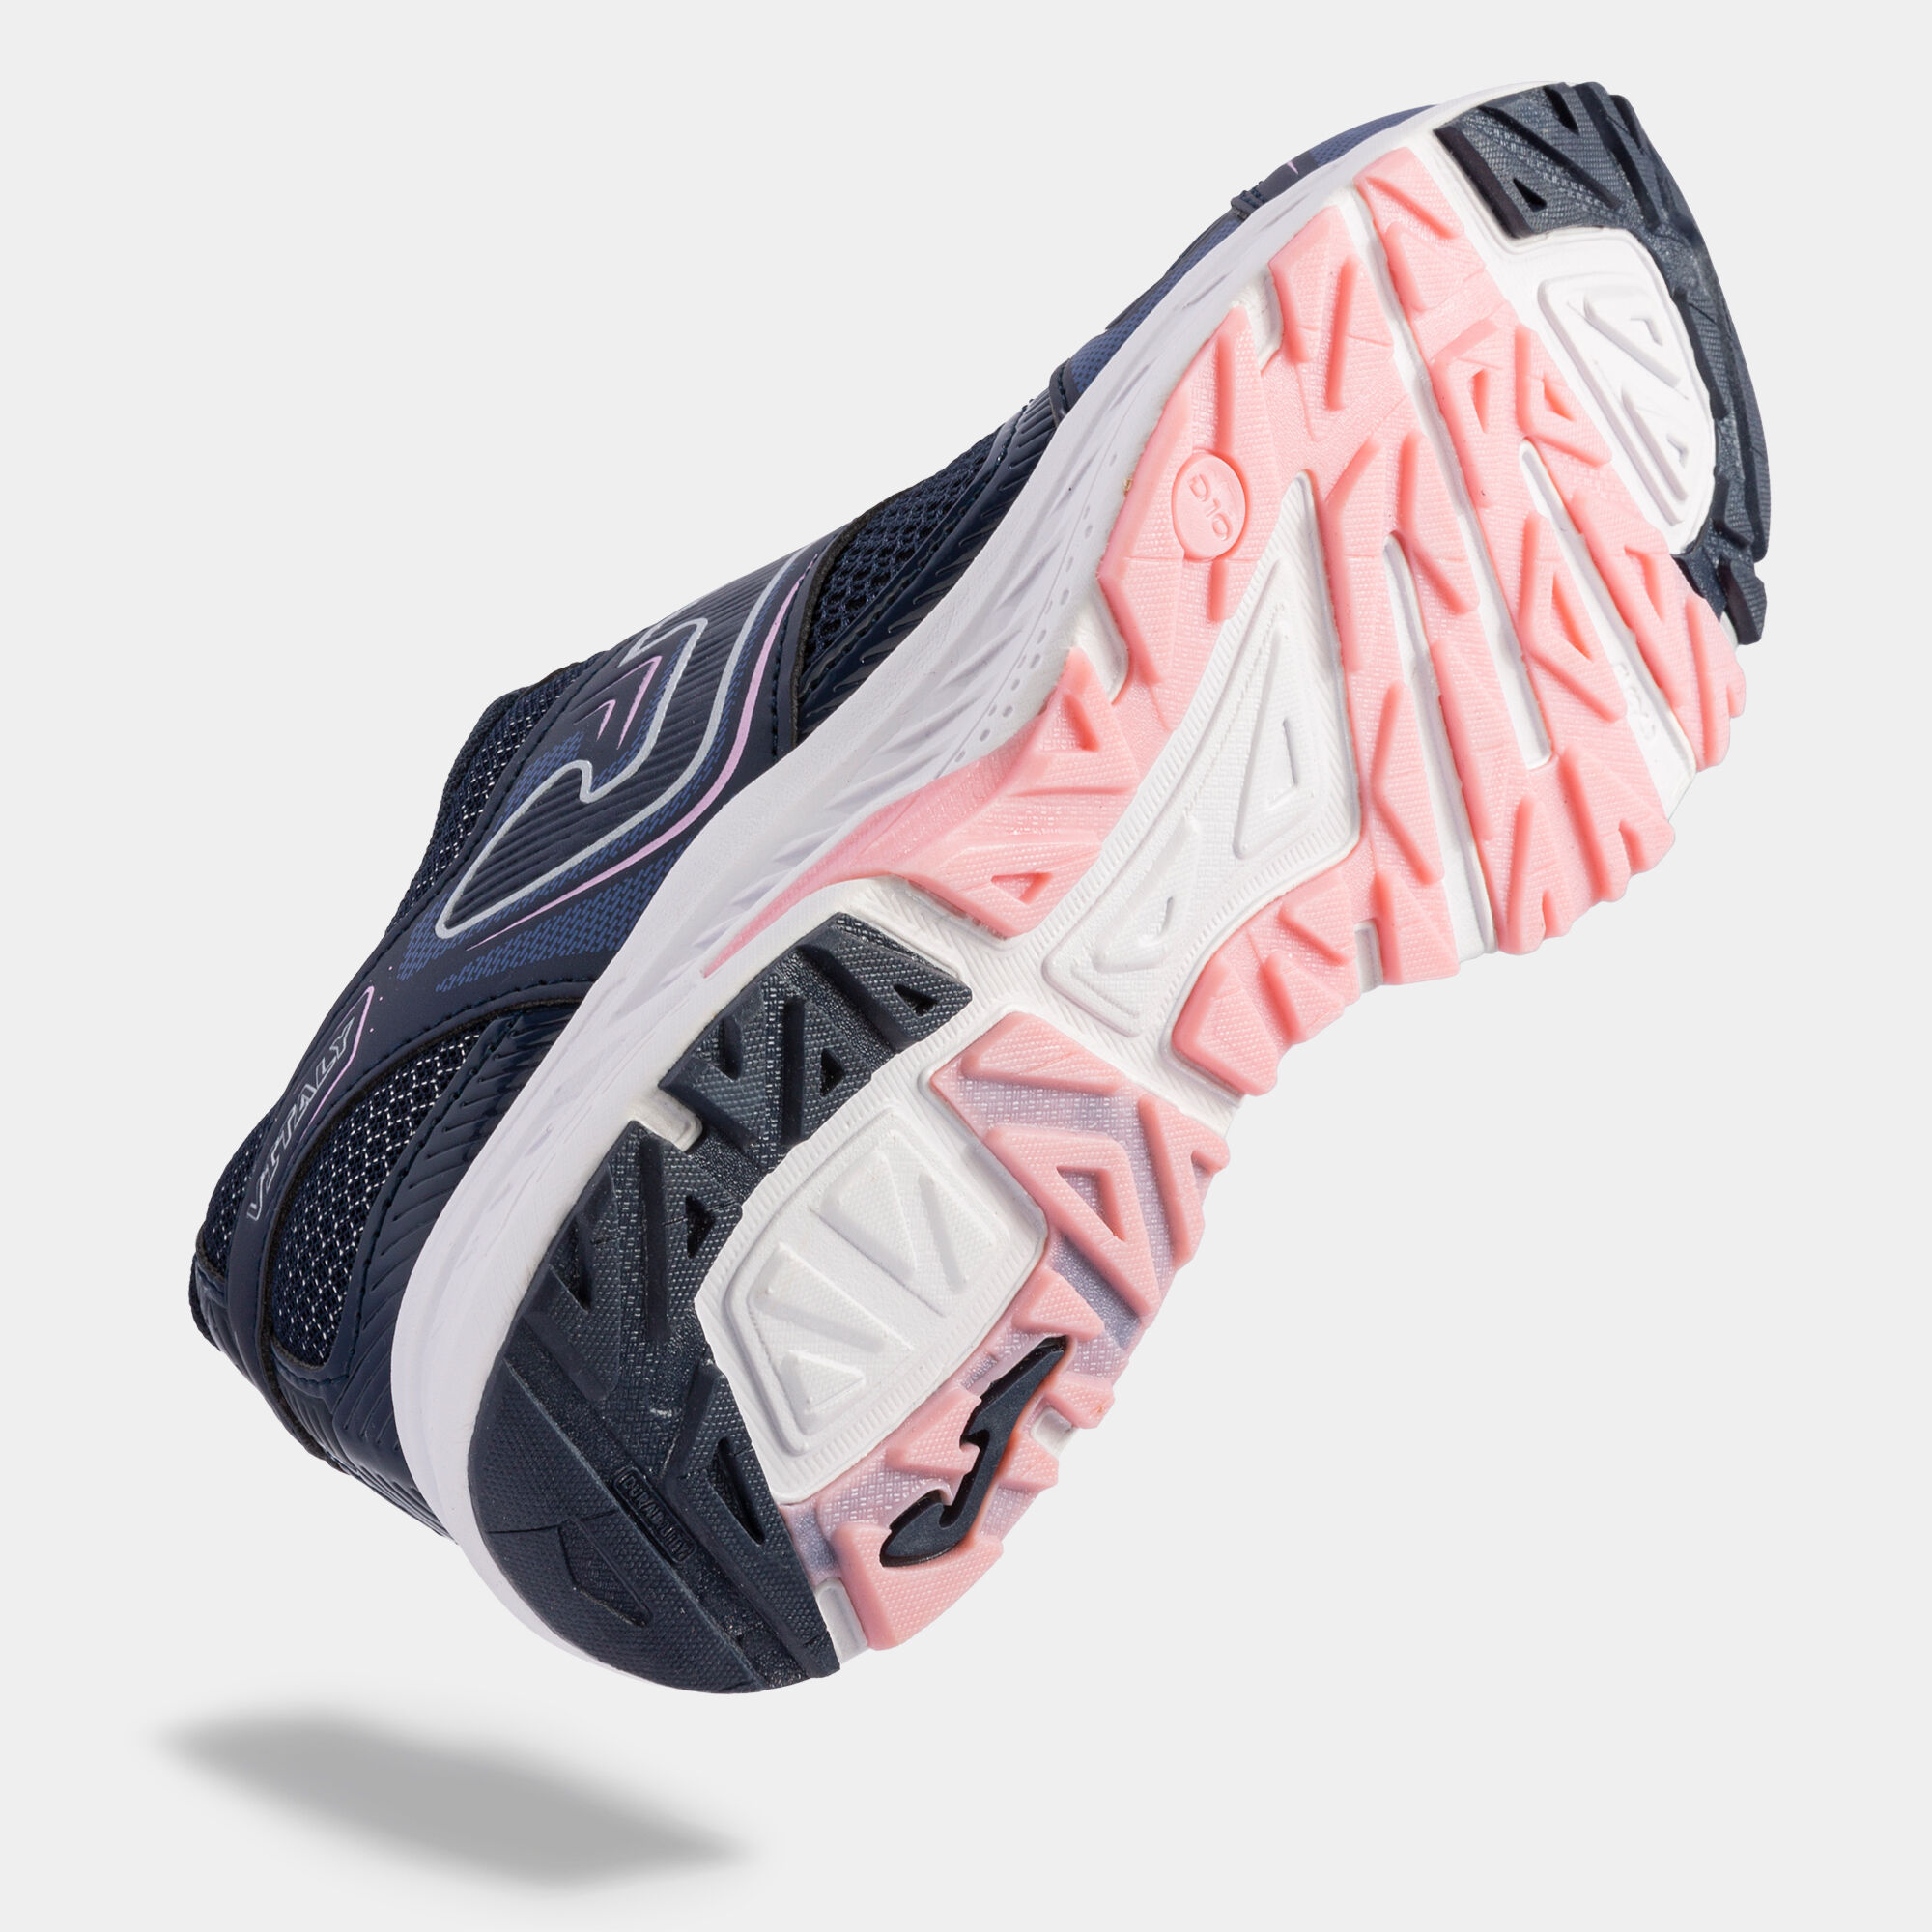 Running shoes Vitaly 22 woman navy pink